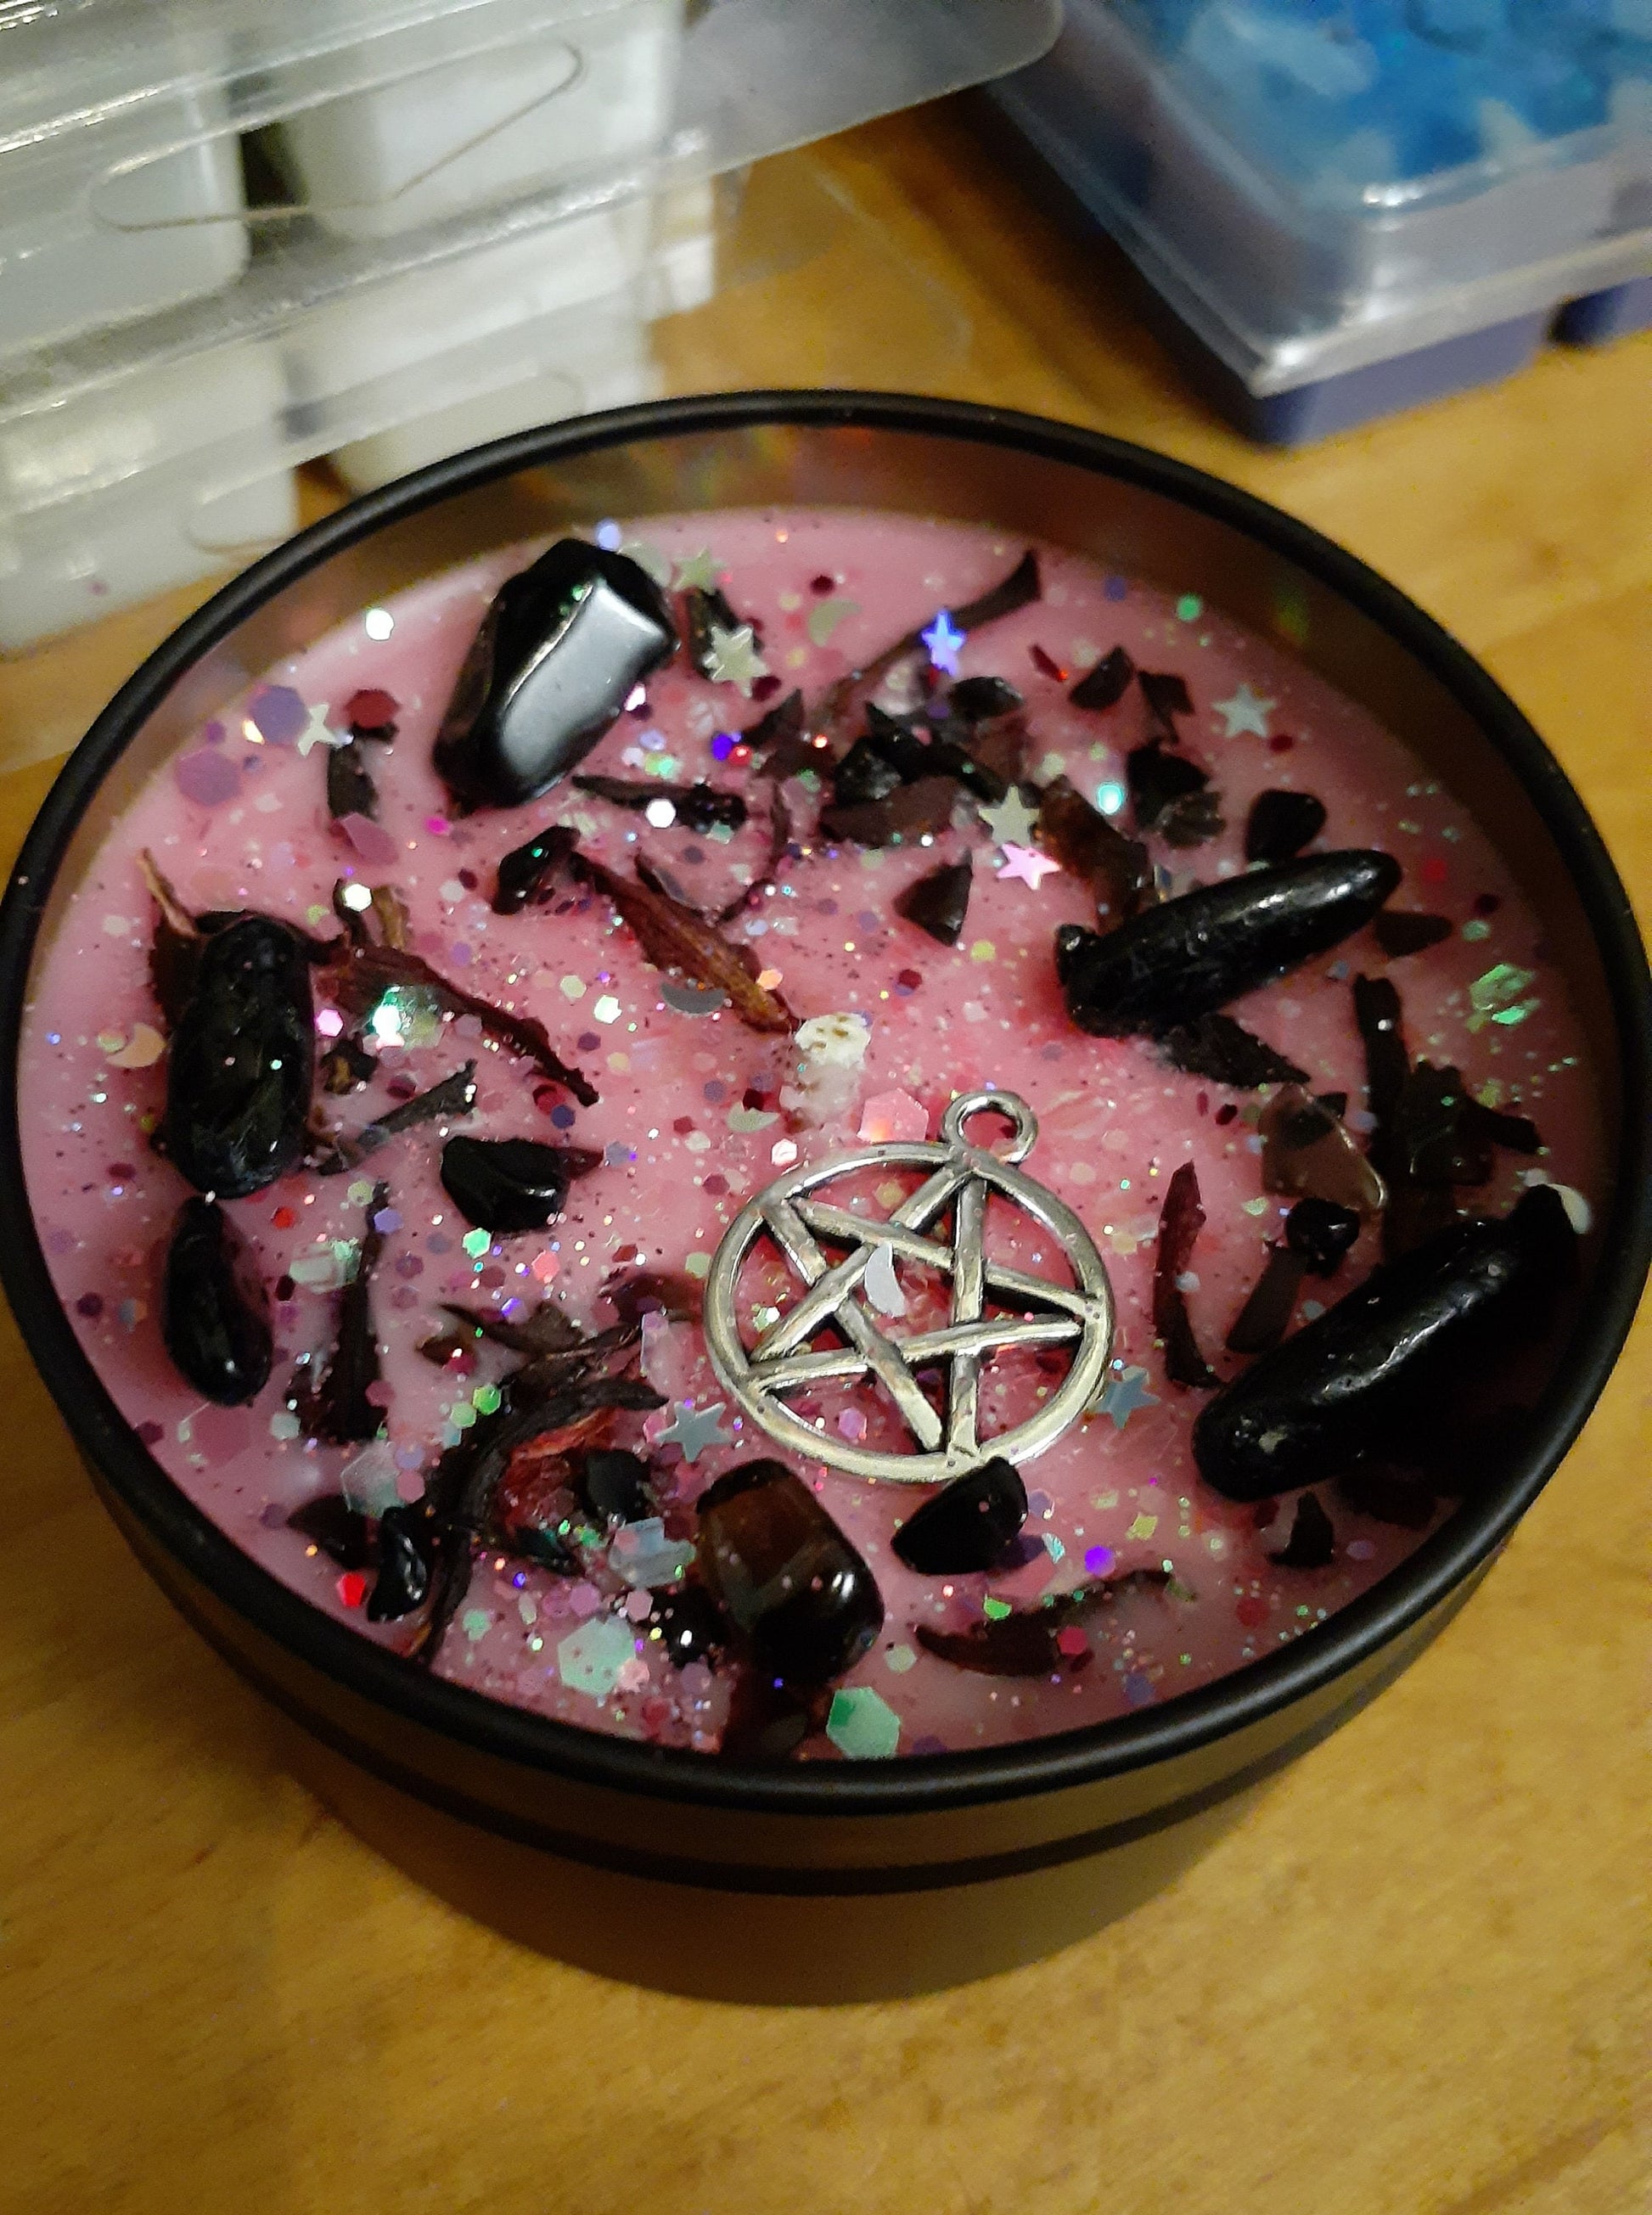 KALI Hindu Goddess of Death, Destruction, Time, Chaos, and Sexuality - Amber & Lavender w/Hibiscus and Obsidian - Pagan, Wicca, Wiccan